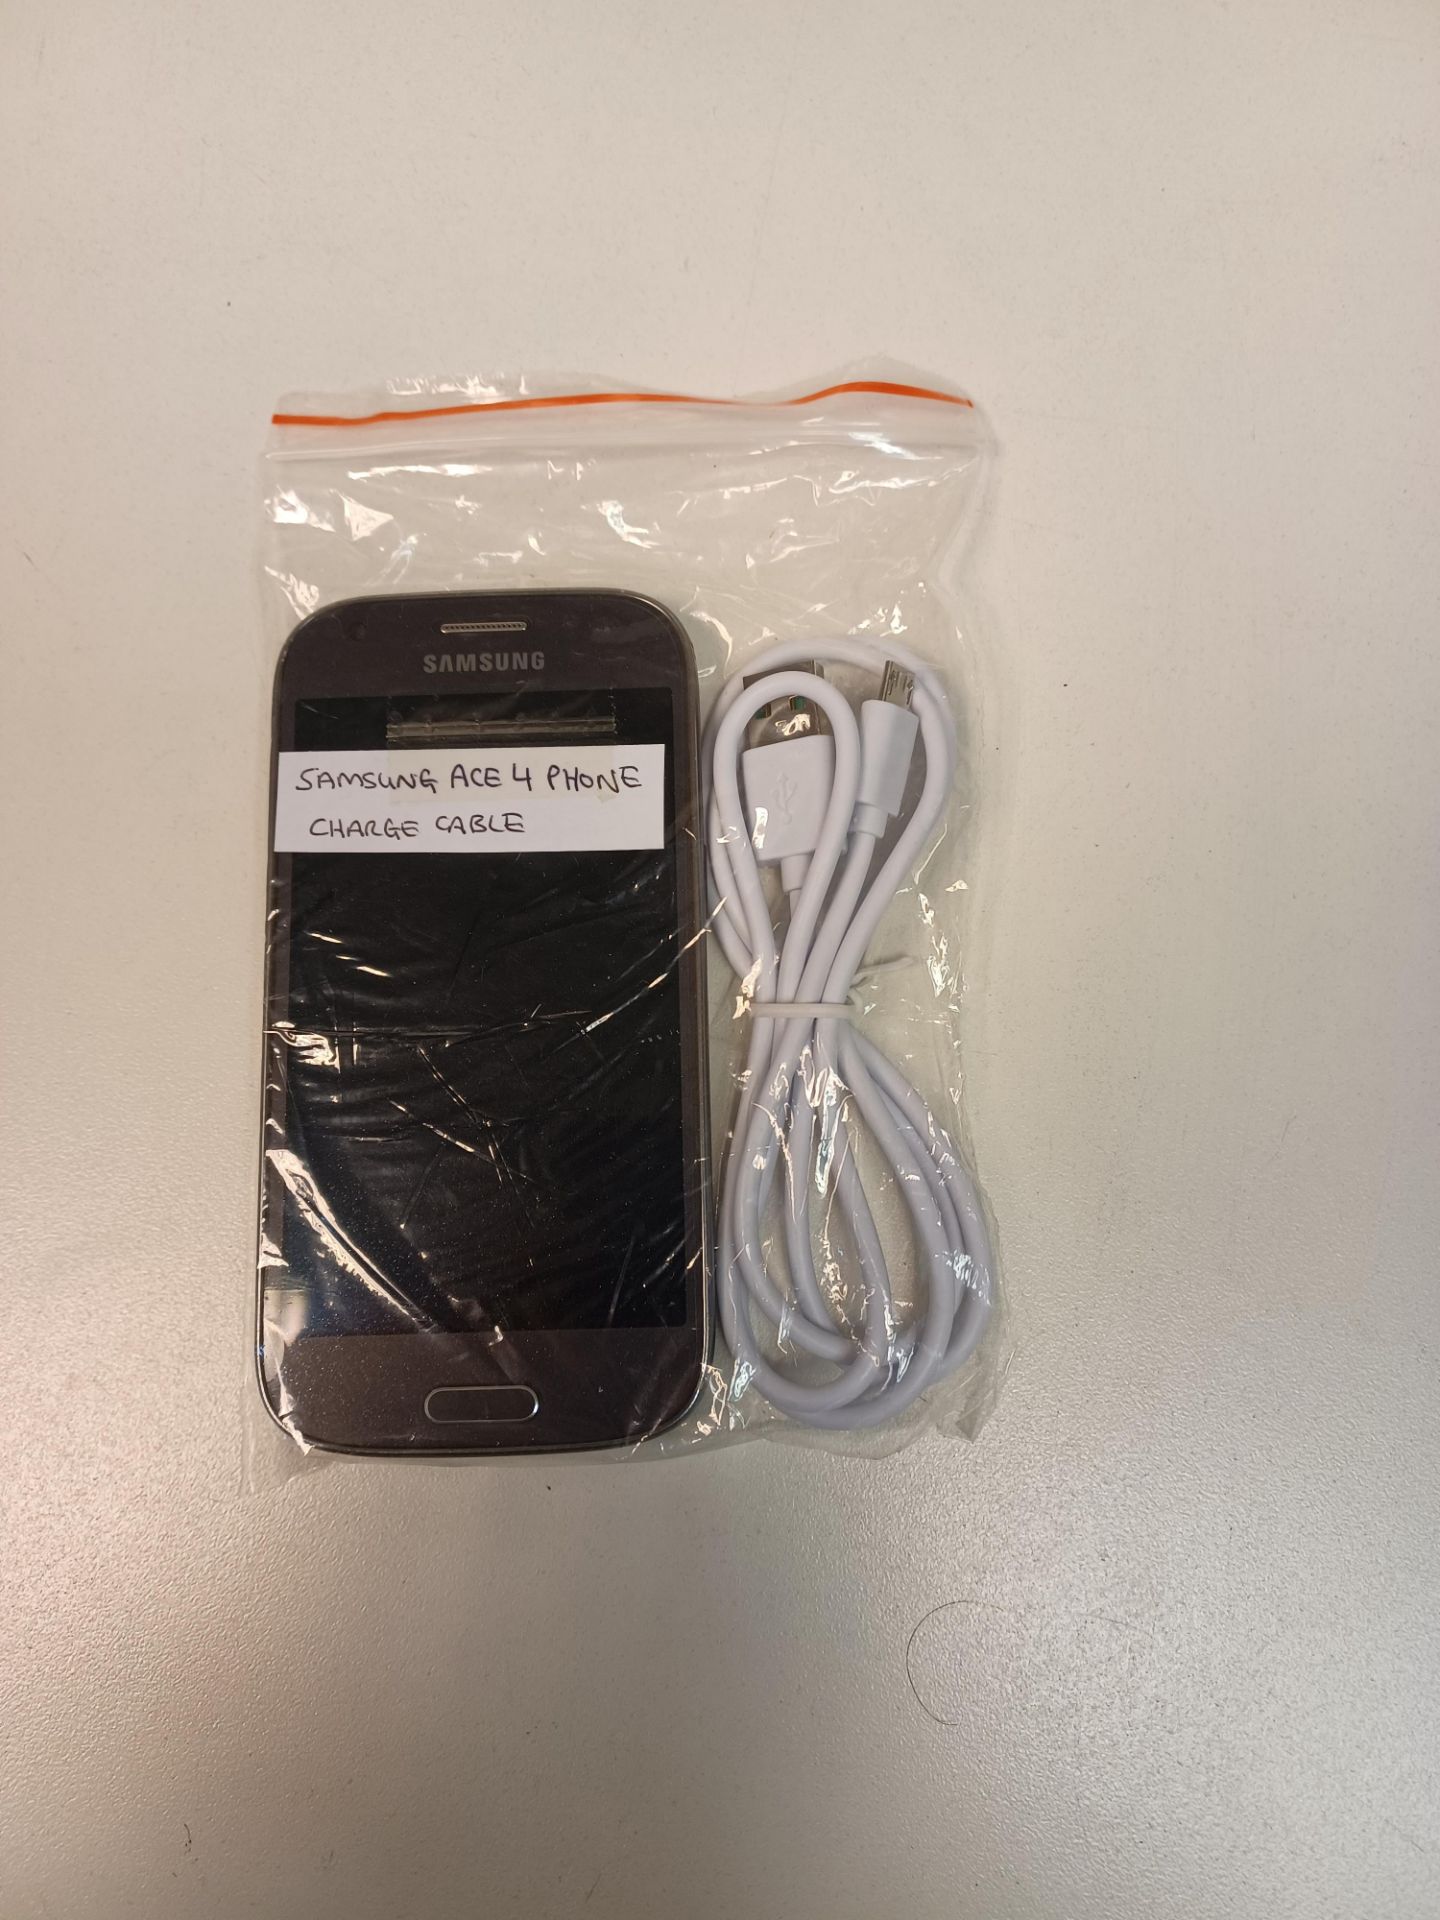 SAMSUNG ACE 4 PHONE WITH CHARGE CABLE